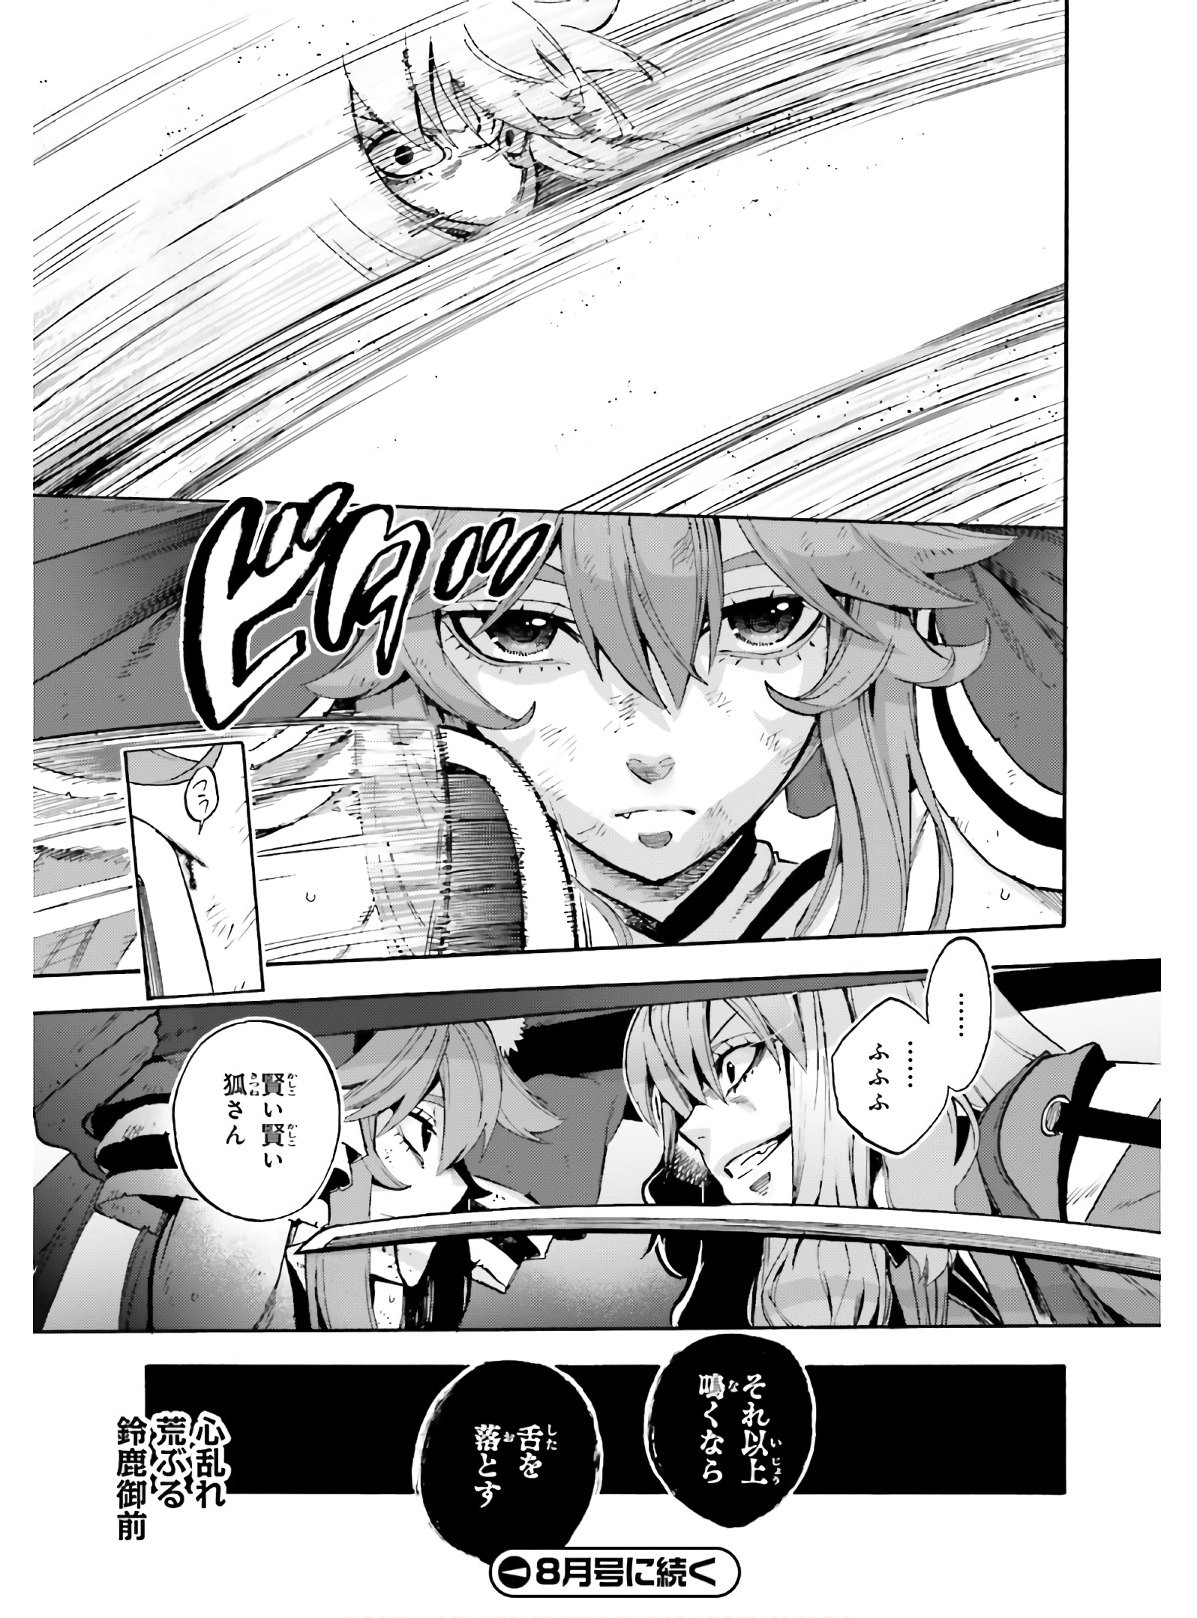 Fate Extra Ccc Fox Tail Chapter 59 Page 17 Raw Manga 生漫画